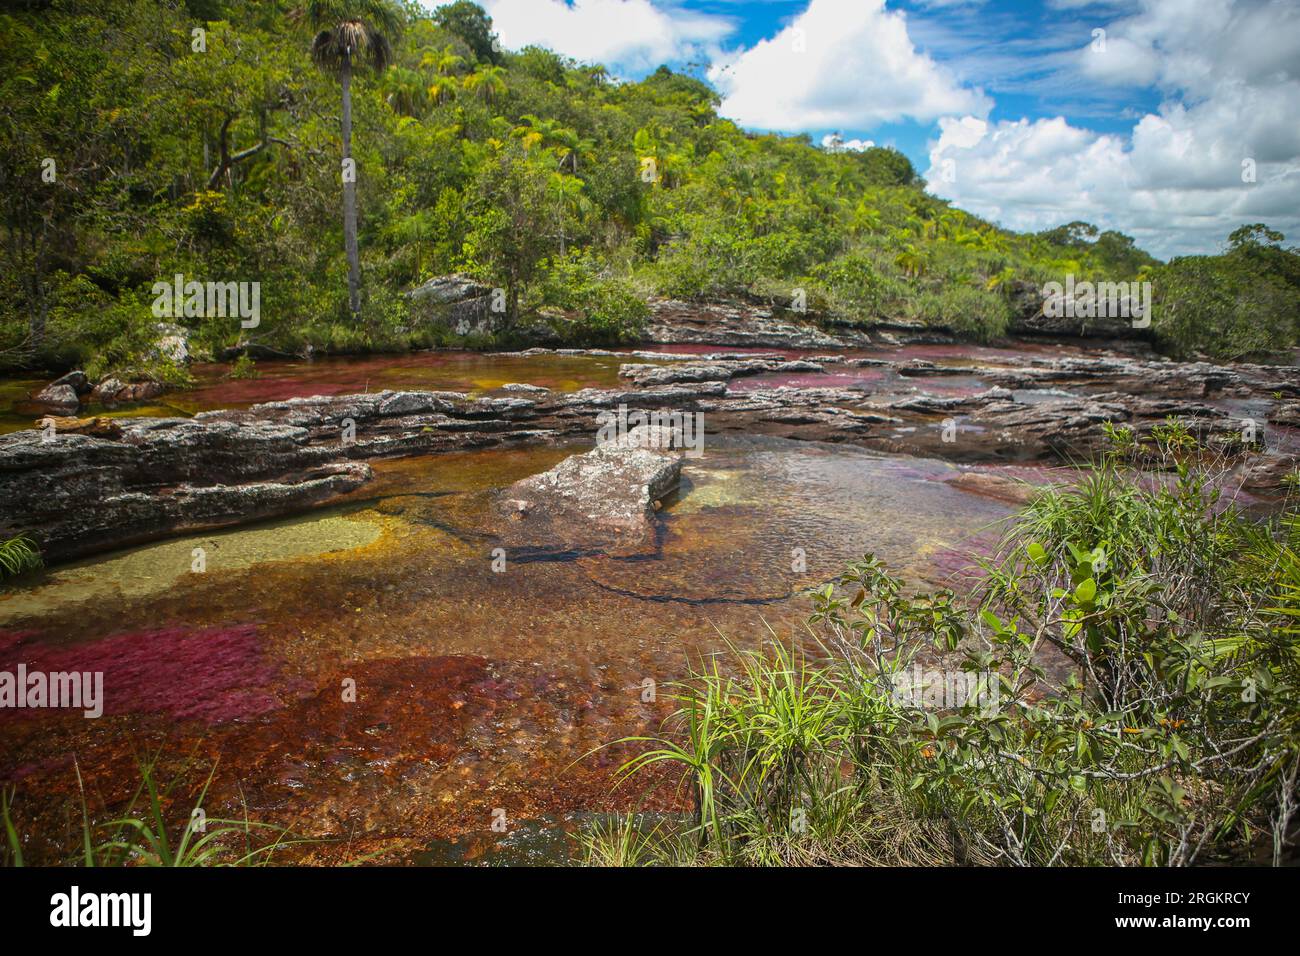 Caño Cristales, also known as the River of Five Colors, is a Colombian river located in the Serranía de la Macarena, an isolated mountain range in the Stock Photo